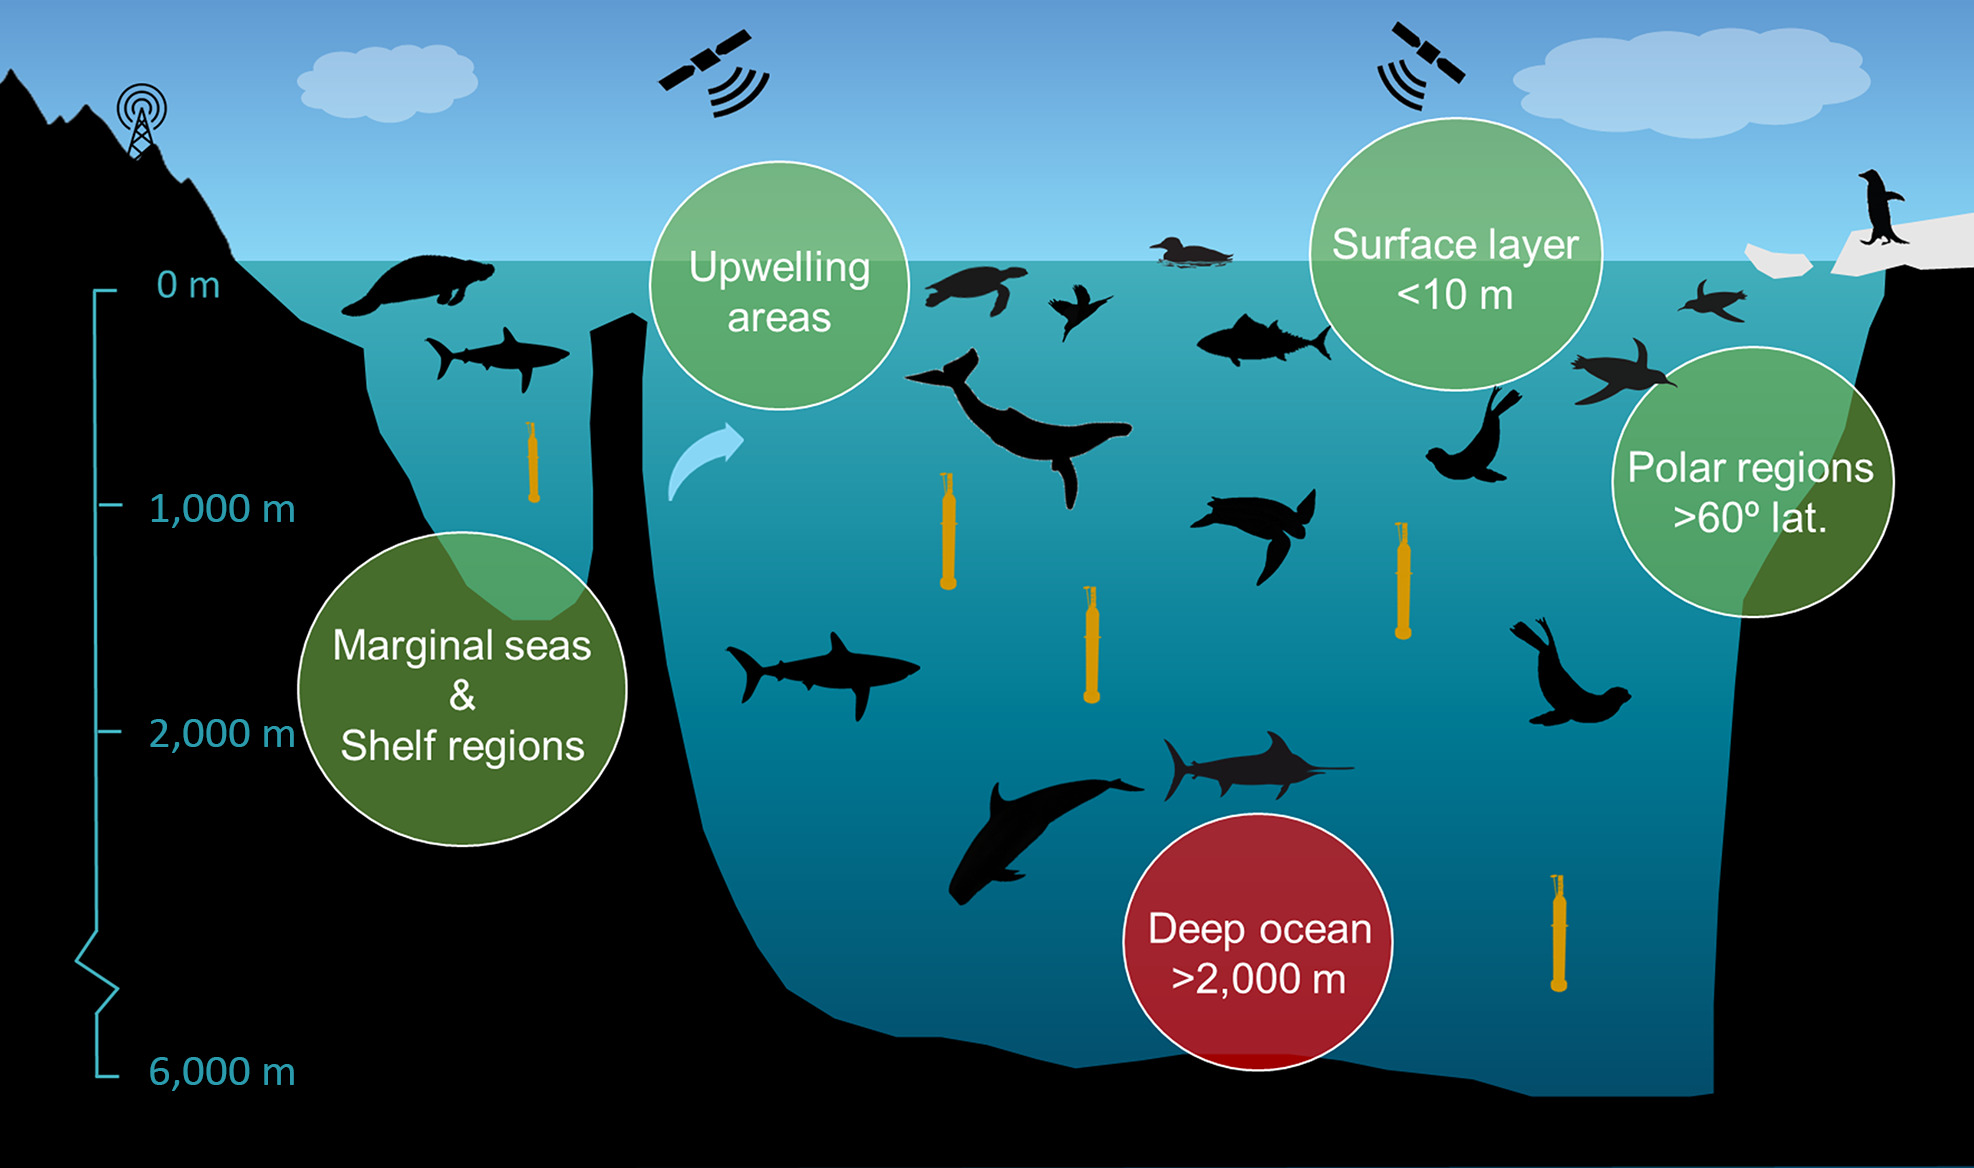 The main areas where animal-borne instruments can contribute are marginal seas and shelf regions upwelling areas, but also the upper 10 m and deep ocean, and poleward of 60° latitude. (source: [March et al. 2019])